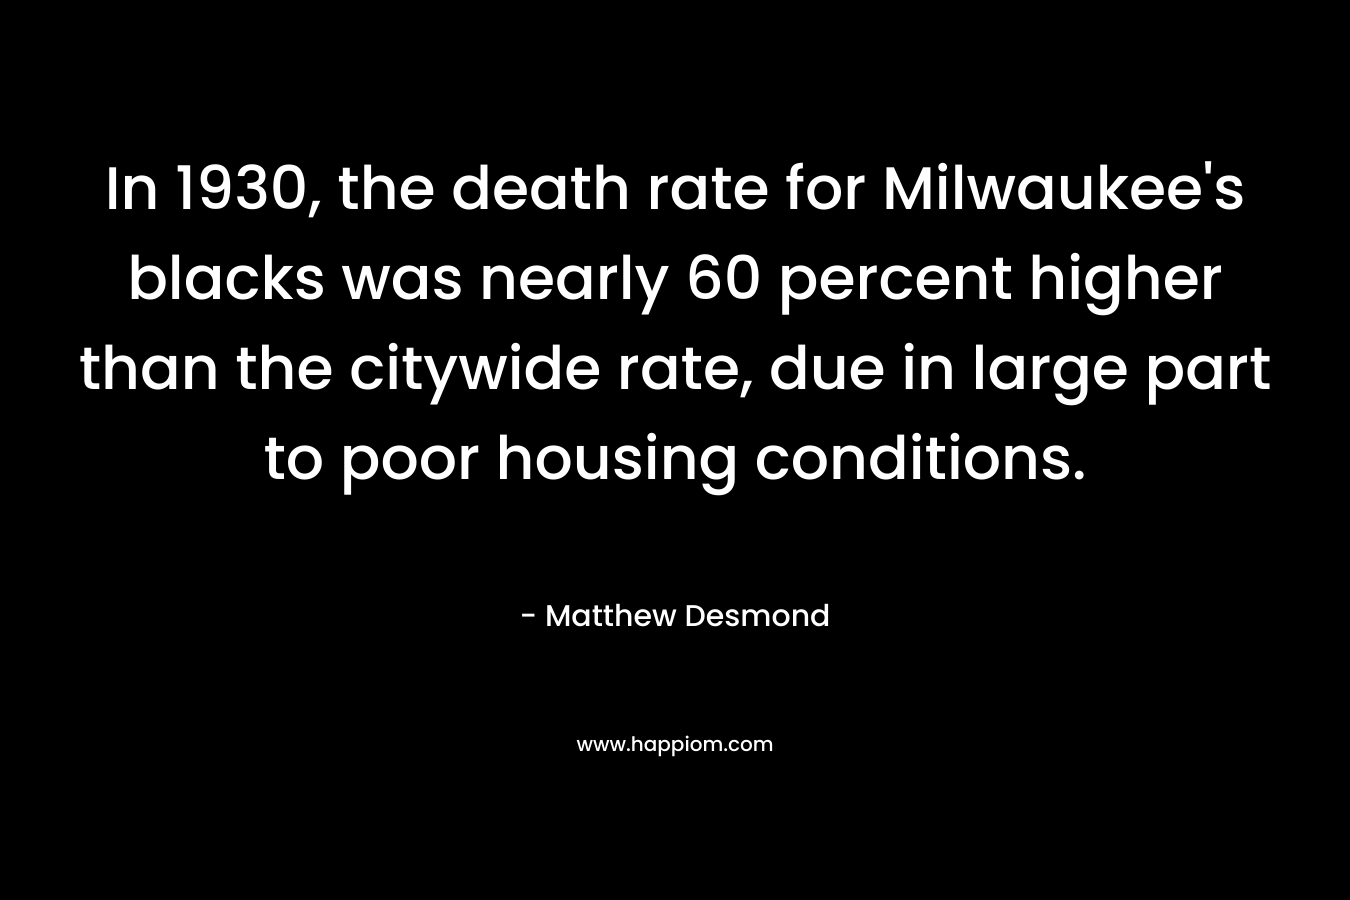 In 1930, the death rate for Milwaukee’s blacks was nearly 60 percent higher than the citywide rate, due in large part to poor housing conditions. – Matthew Desmond